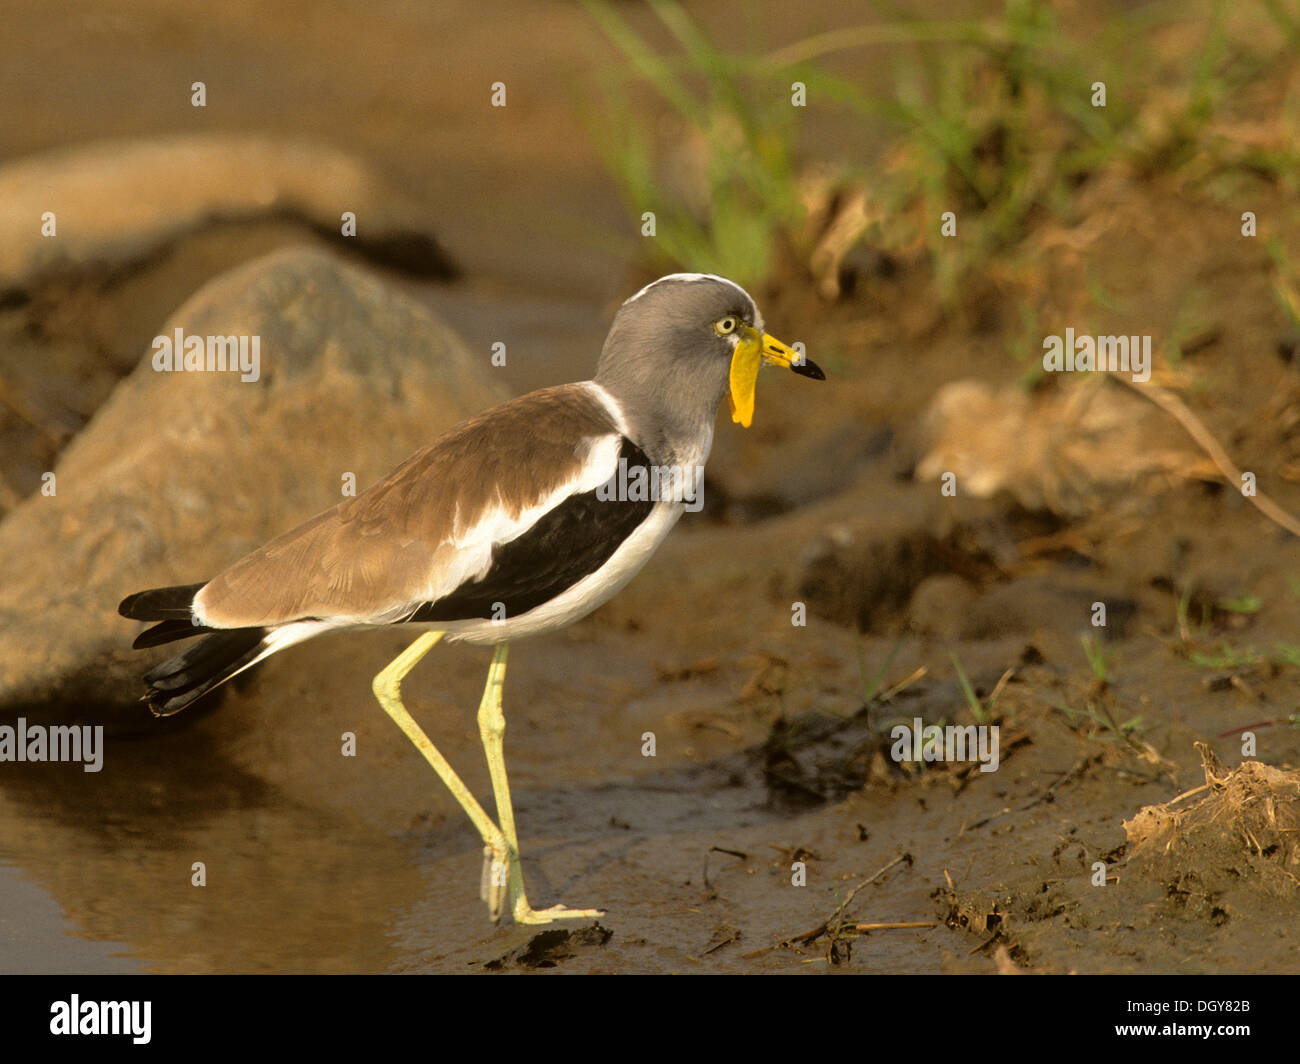 White-headed Lapwing, White-headed Plover or White-crowned Plover (Vanellus albiceps), Kruger National Park, South Africa Stock Photo